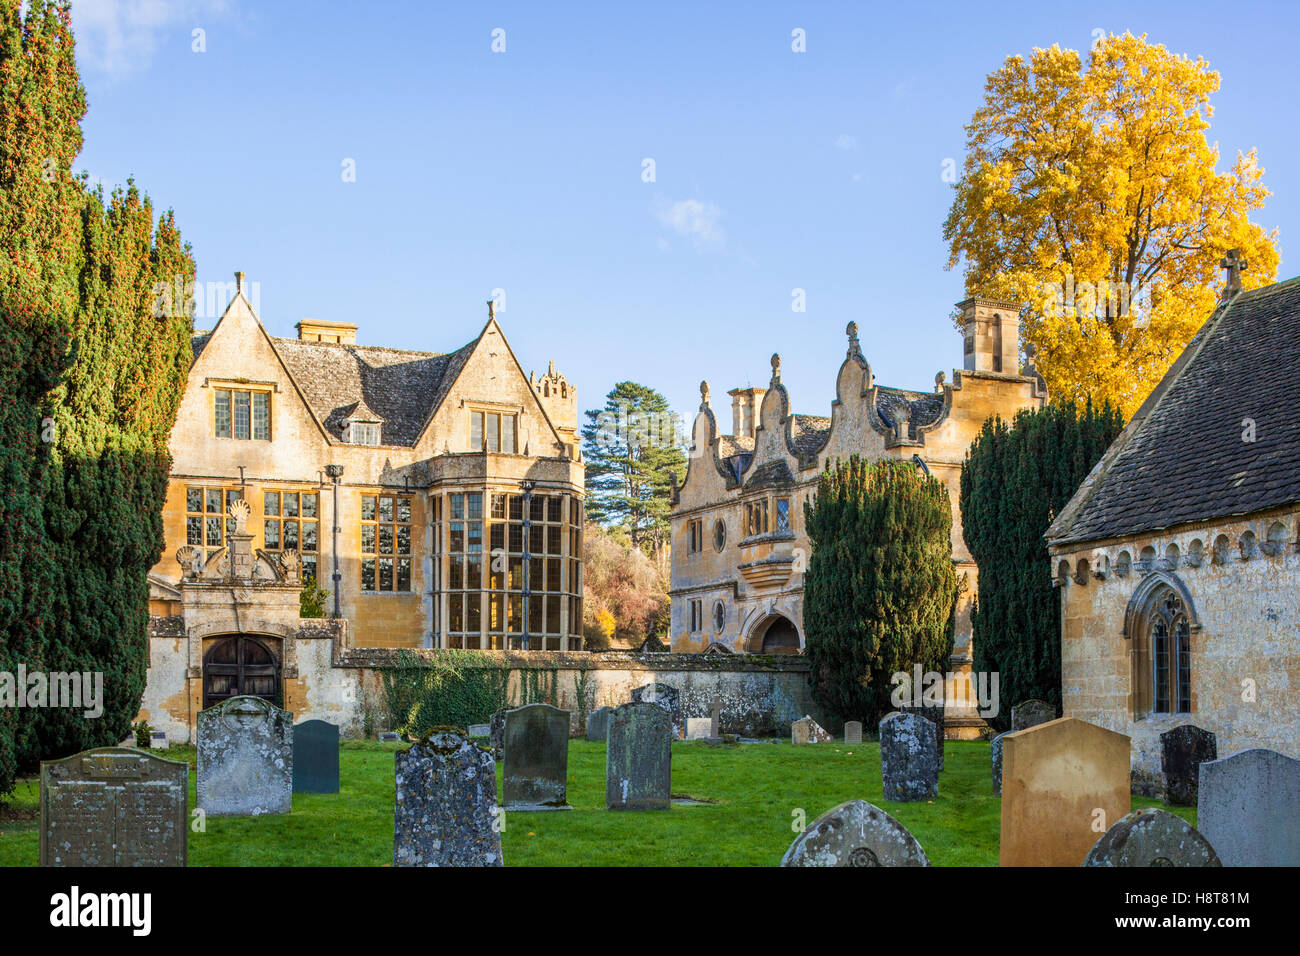 Autumn in the Cotswolds - Stanway House and gatehouse from the churchyard, Stanway, Gloucestershire UK Stock Photo